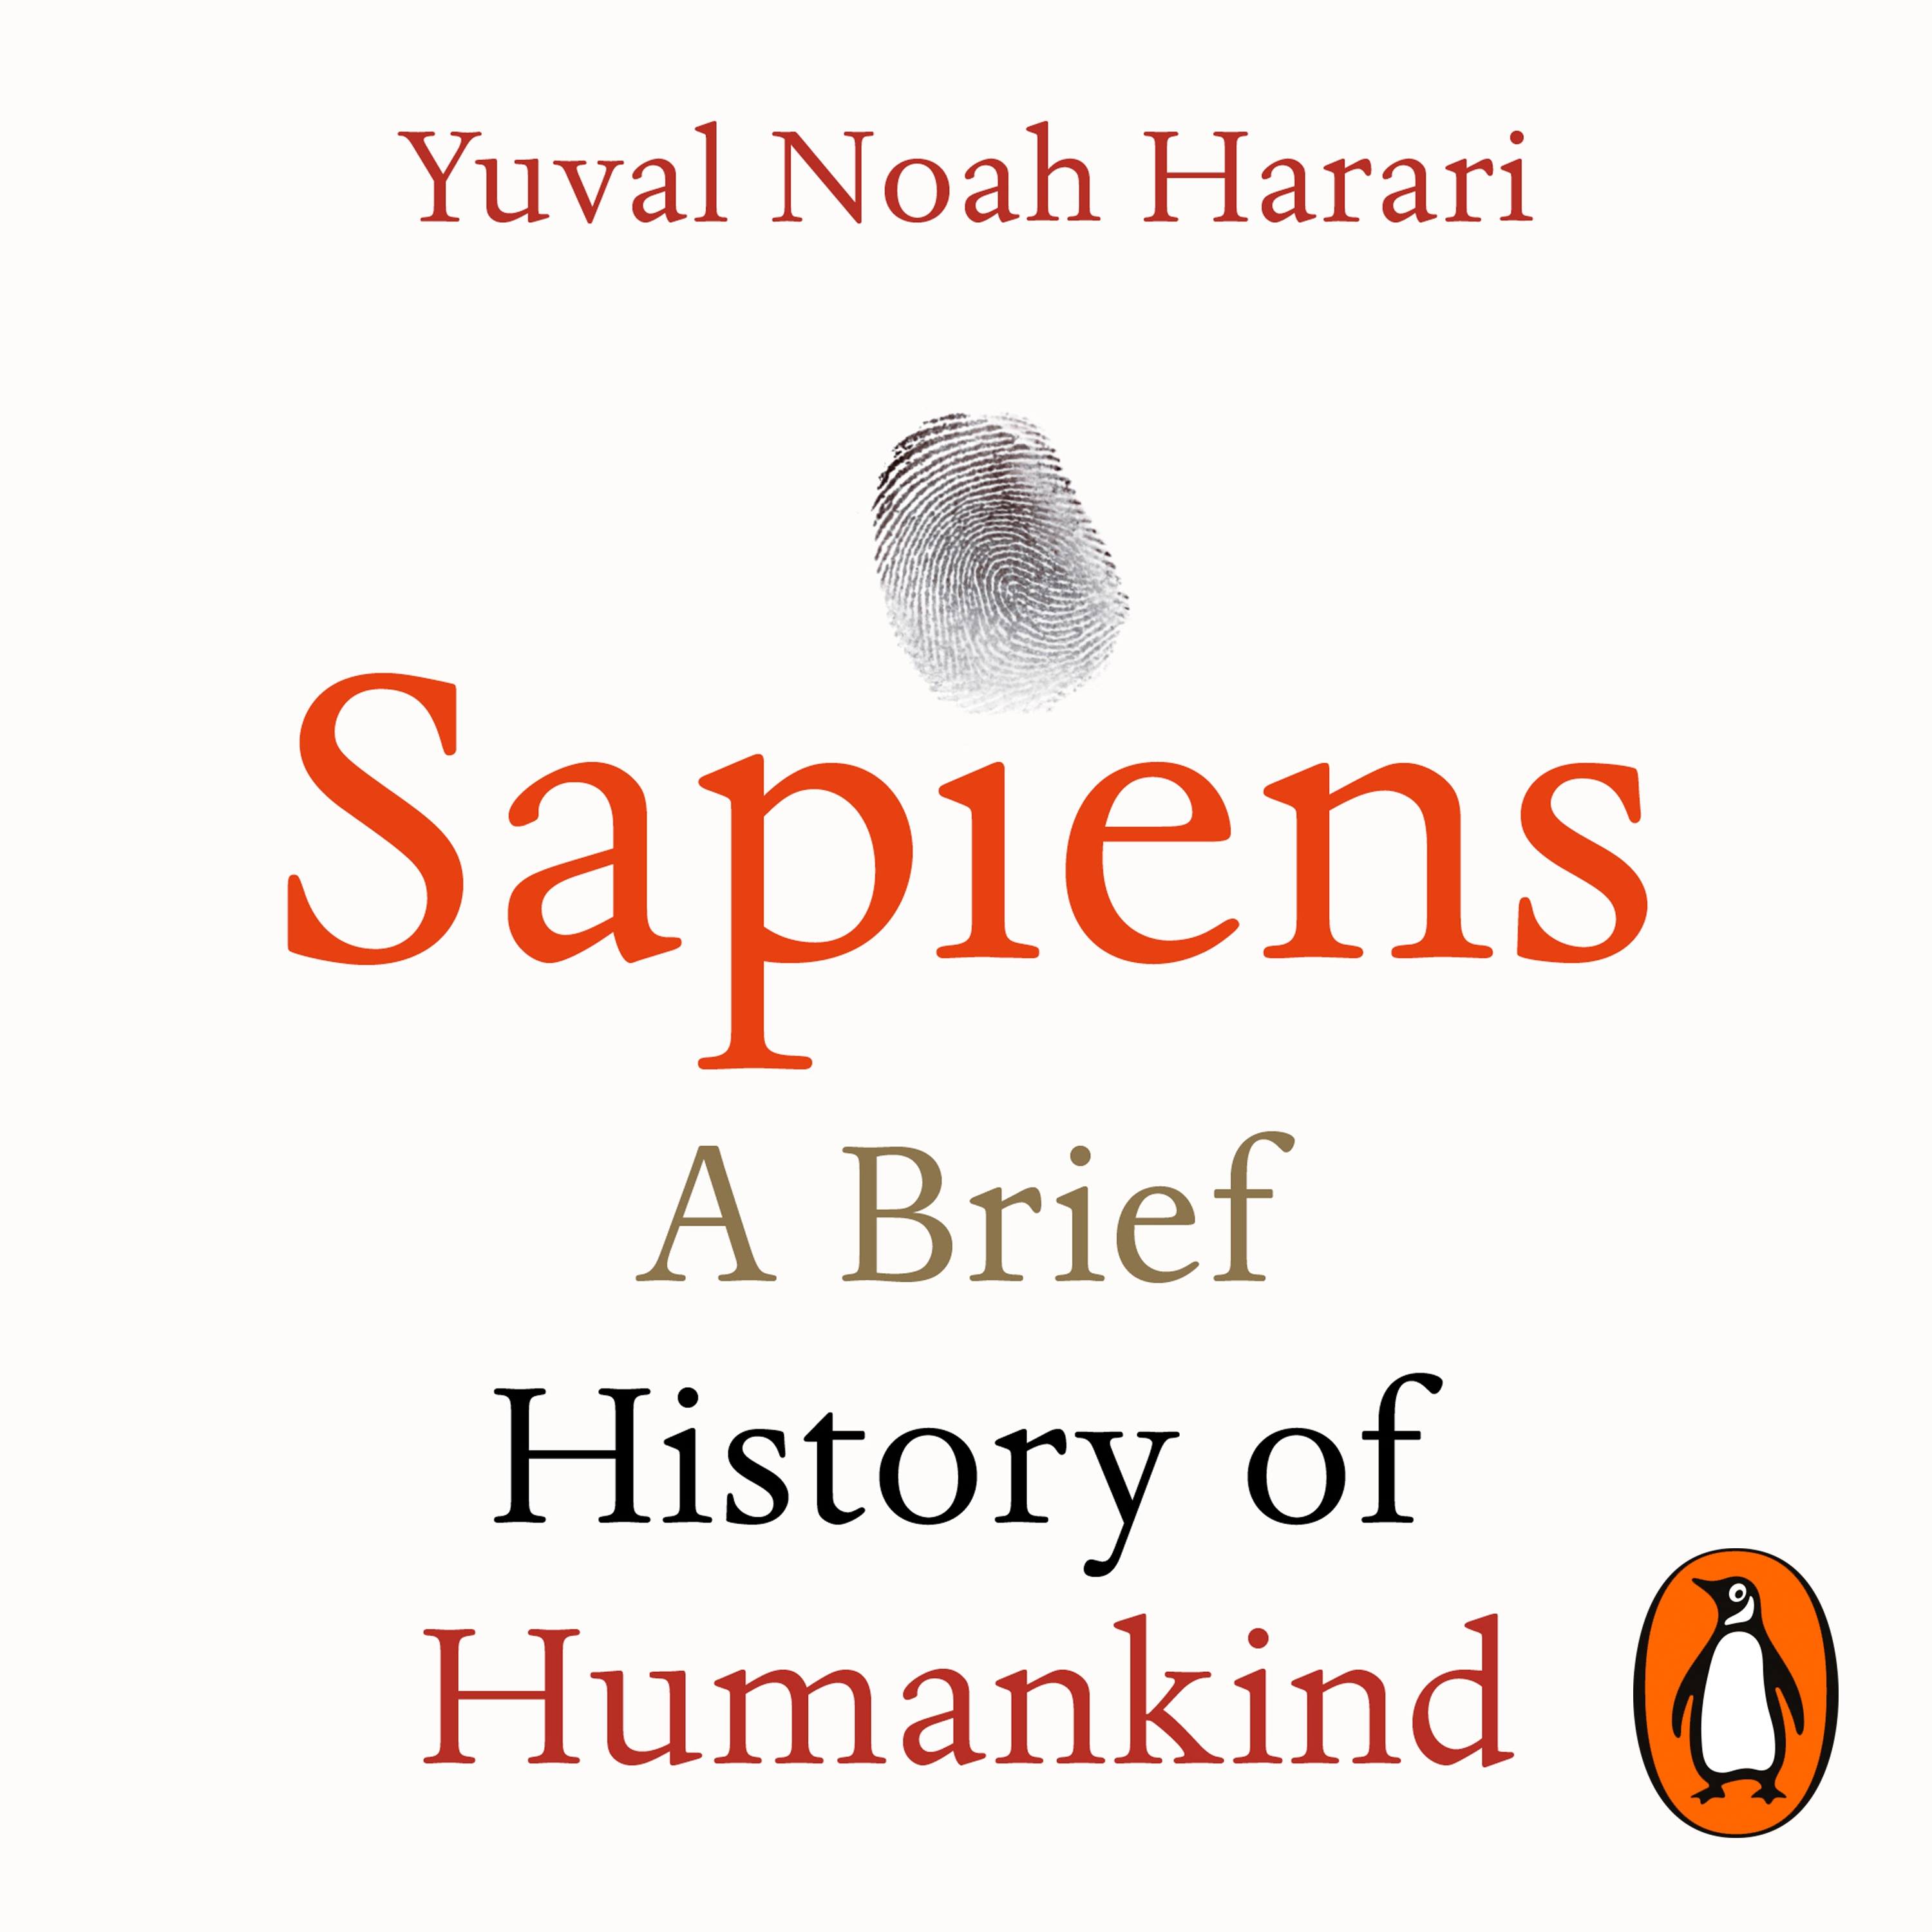 Audiobook image for Sapiens: a cream background with the author's name in red at the top. A thumb print below this, and the title "Sapiens: a brief history of humankind" is stacked in red and grey across the cover.